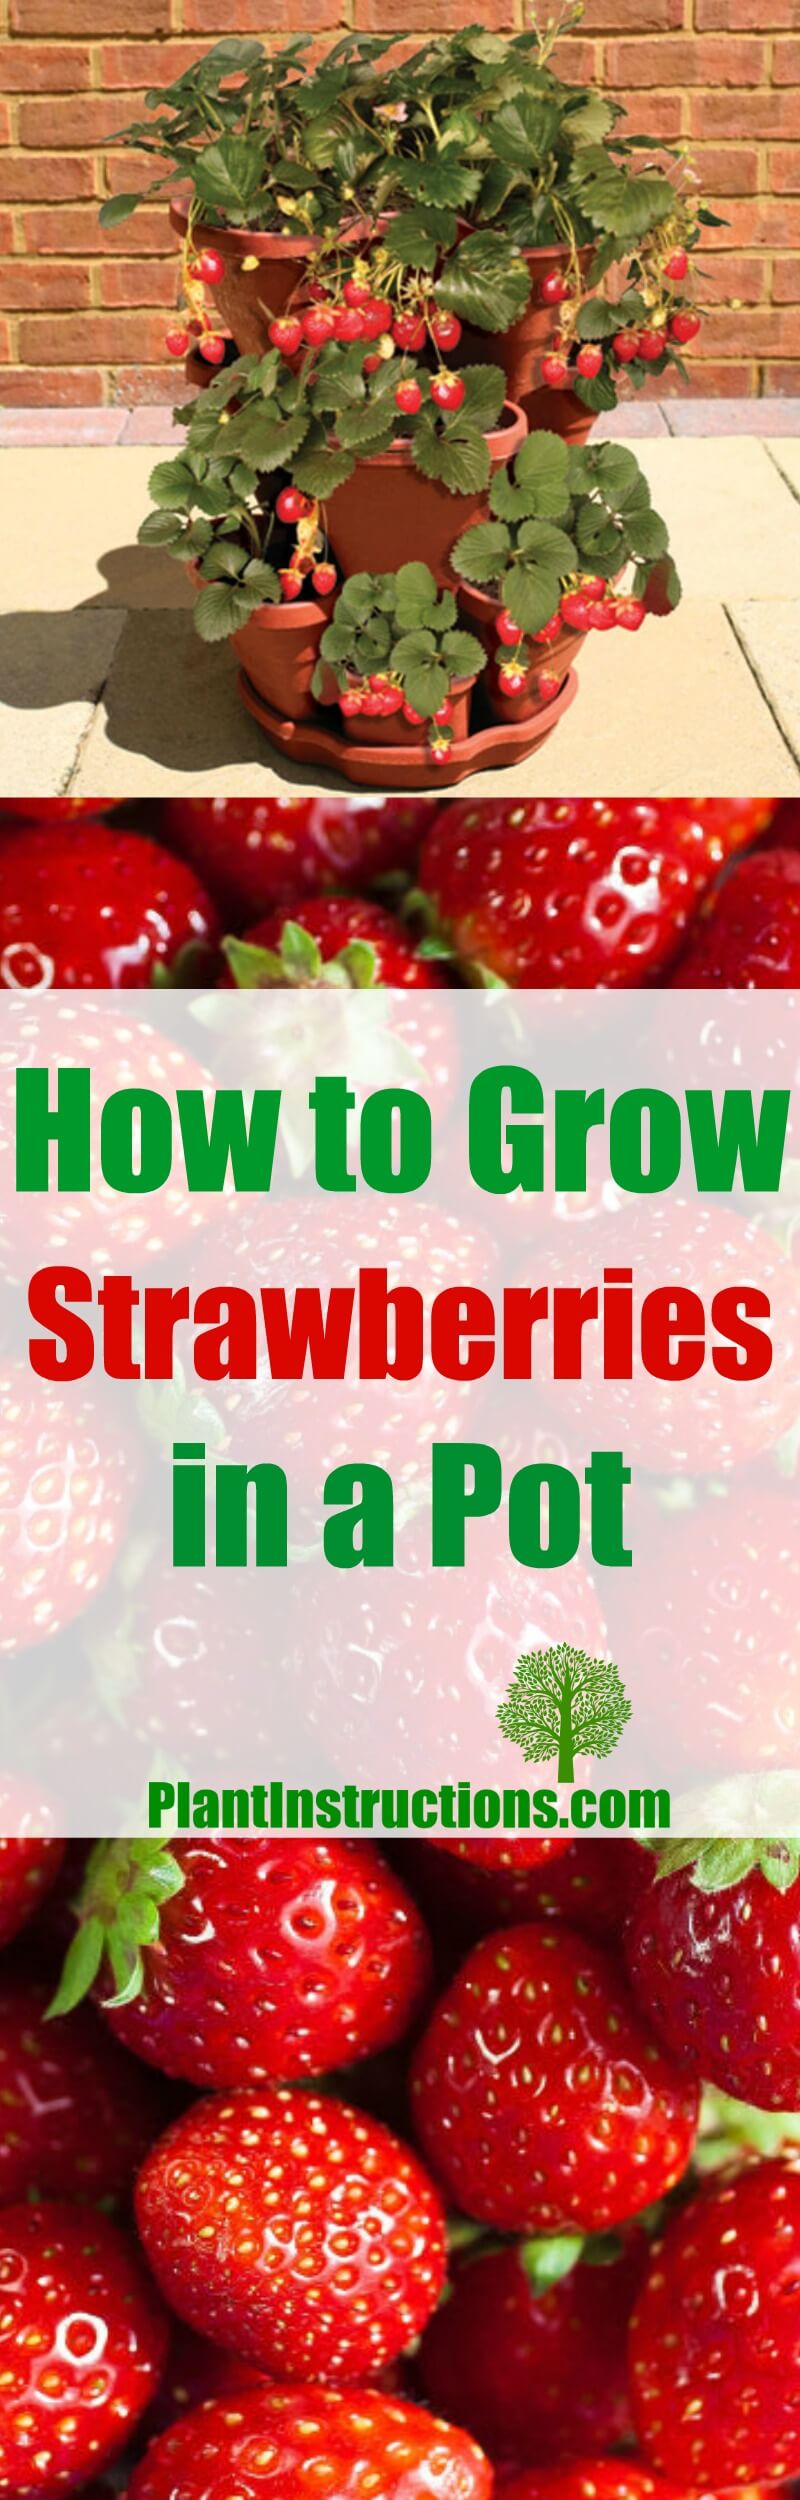 grow strawberries in a pot